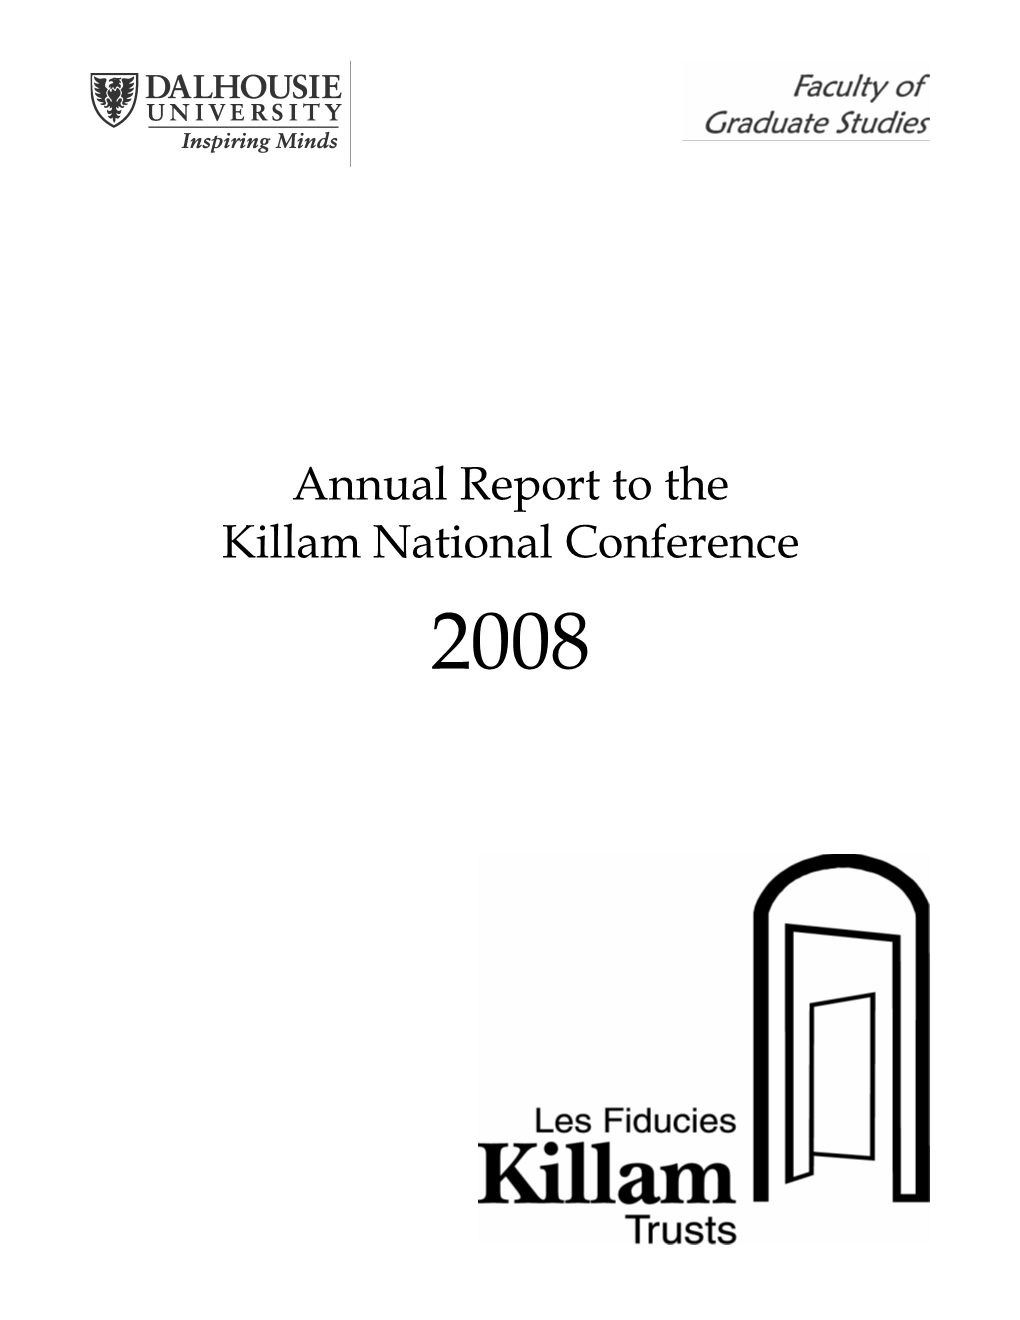 Annual Report to the Killam National Conference